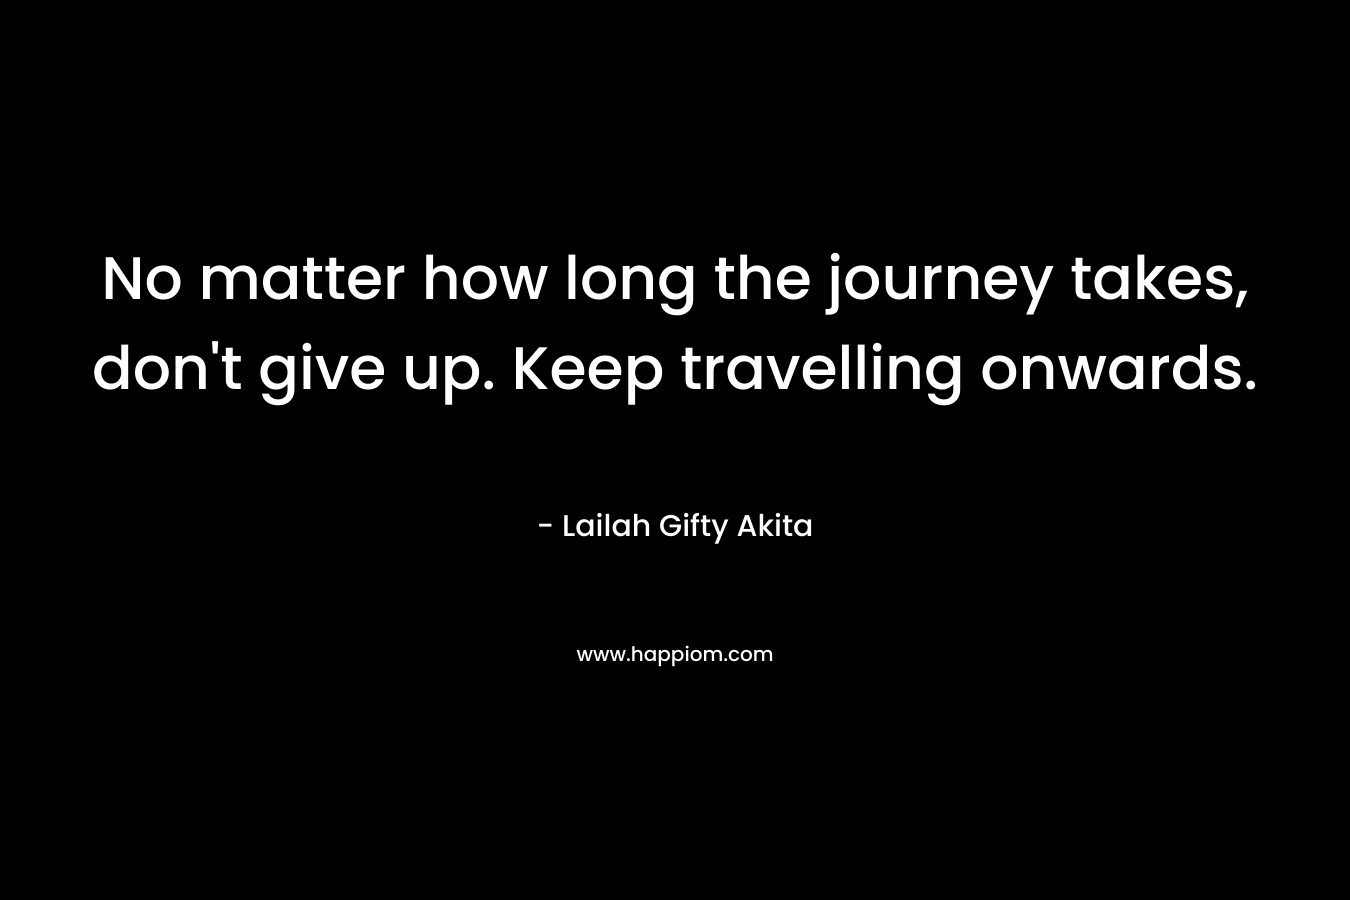 No matter how long the journey takes, don't give up. Keep travelling onwards.